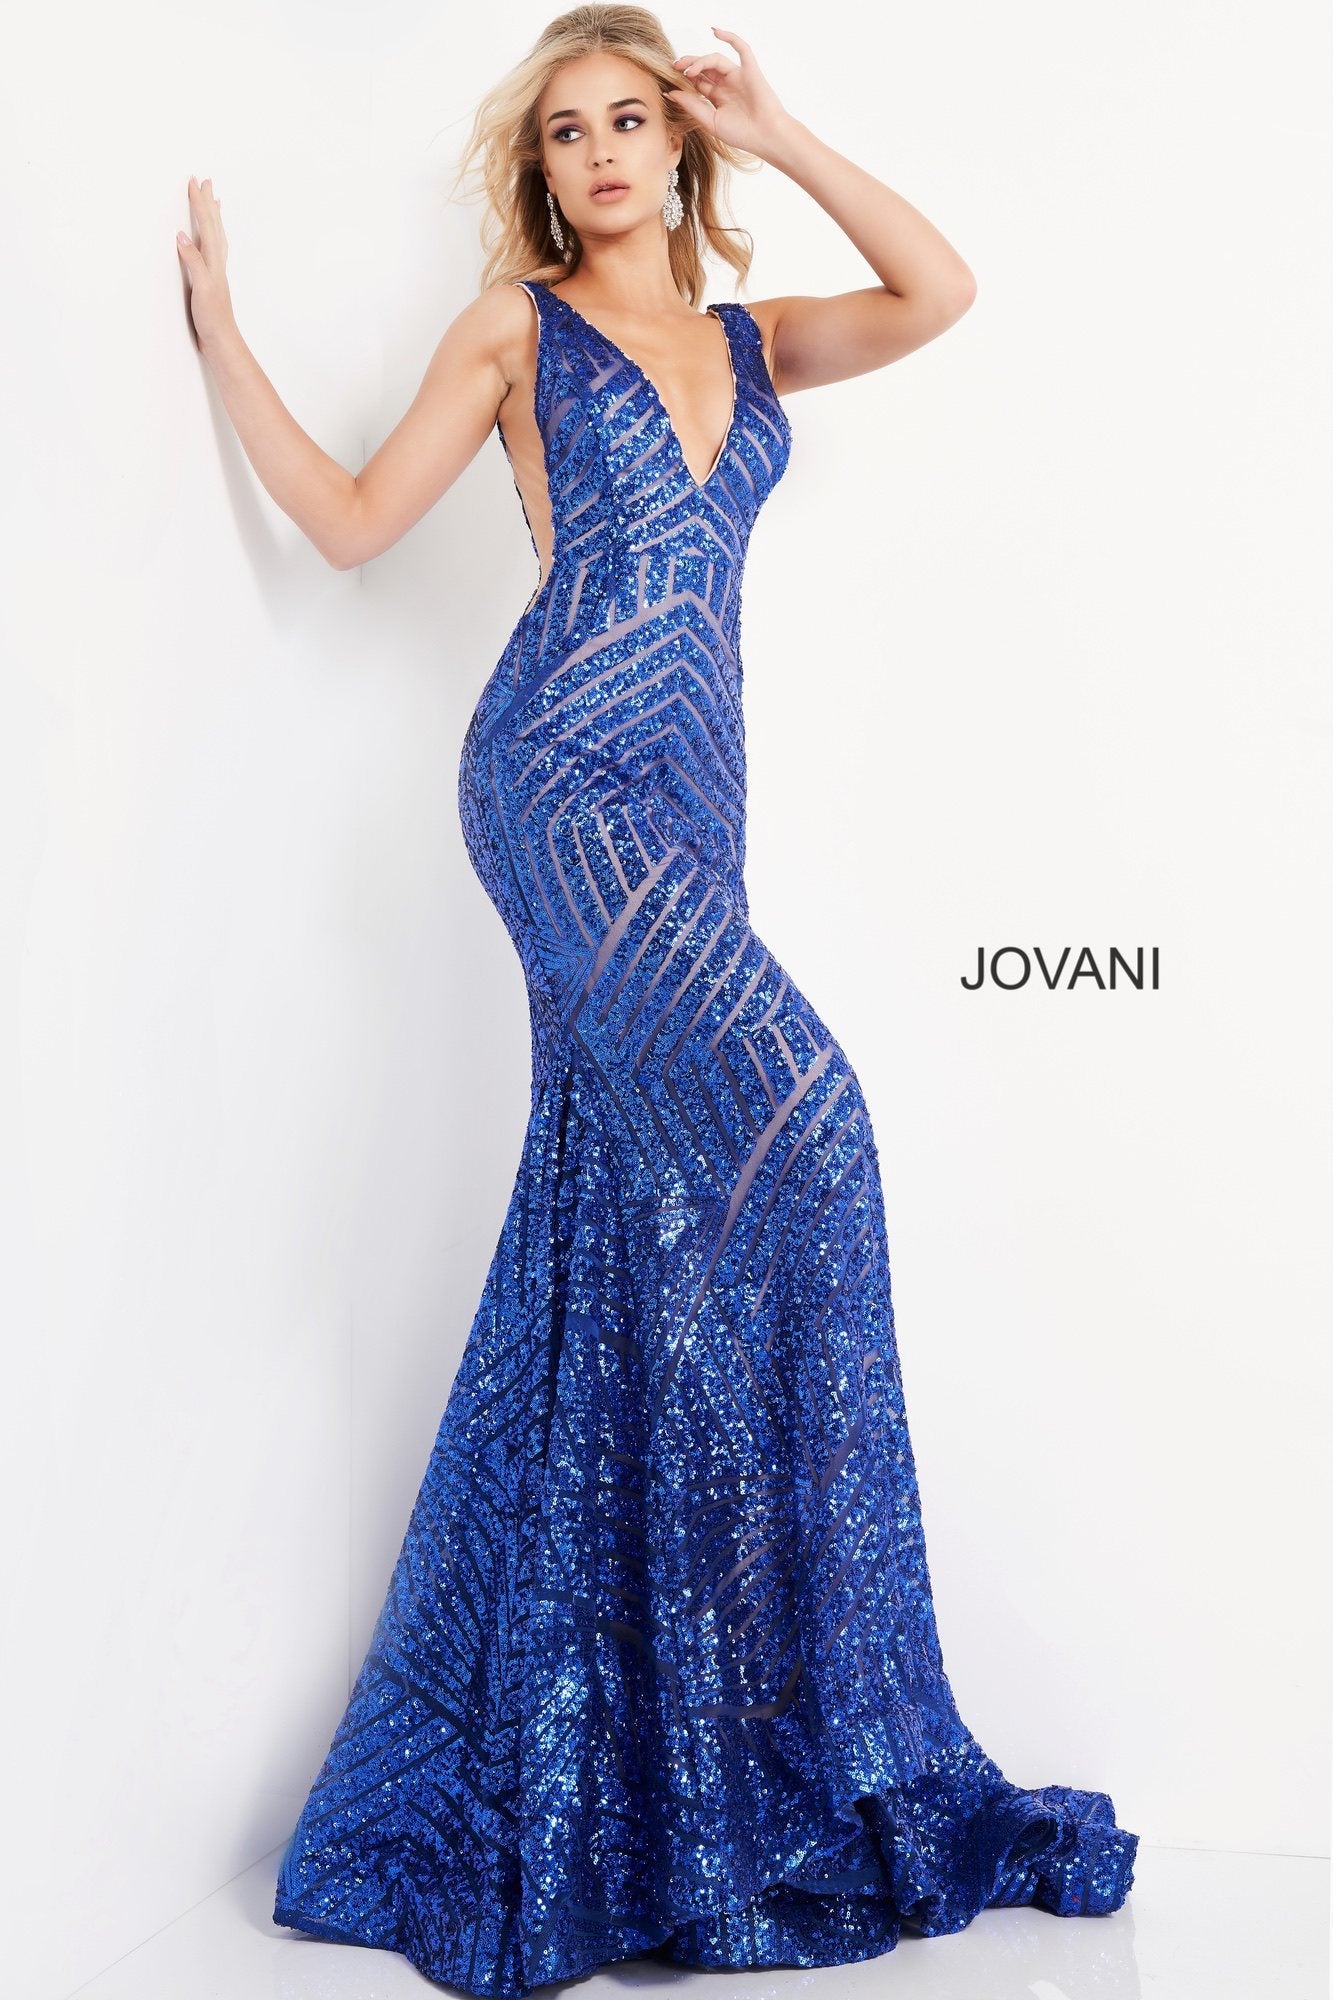 Jovani 59762 Long Prom Dress Sequin Embellished Mermaid Prom Dress Pageant Gown plunging neckline